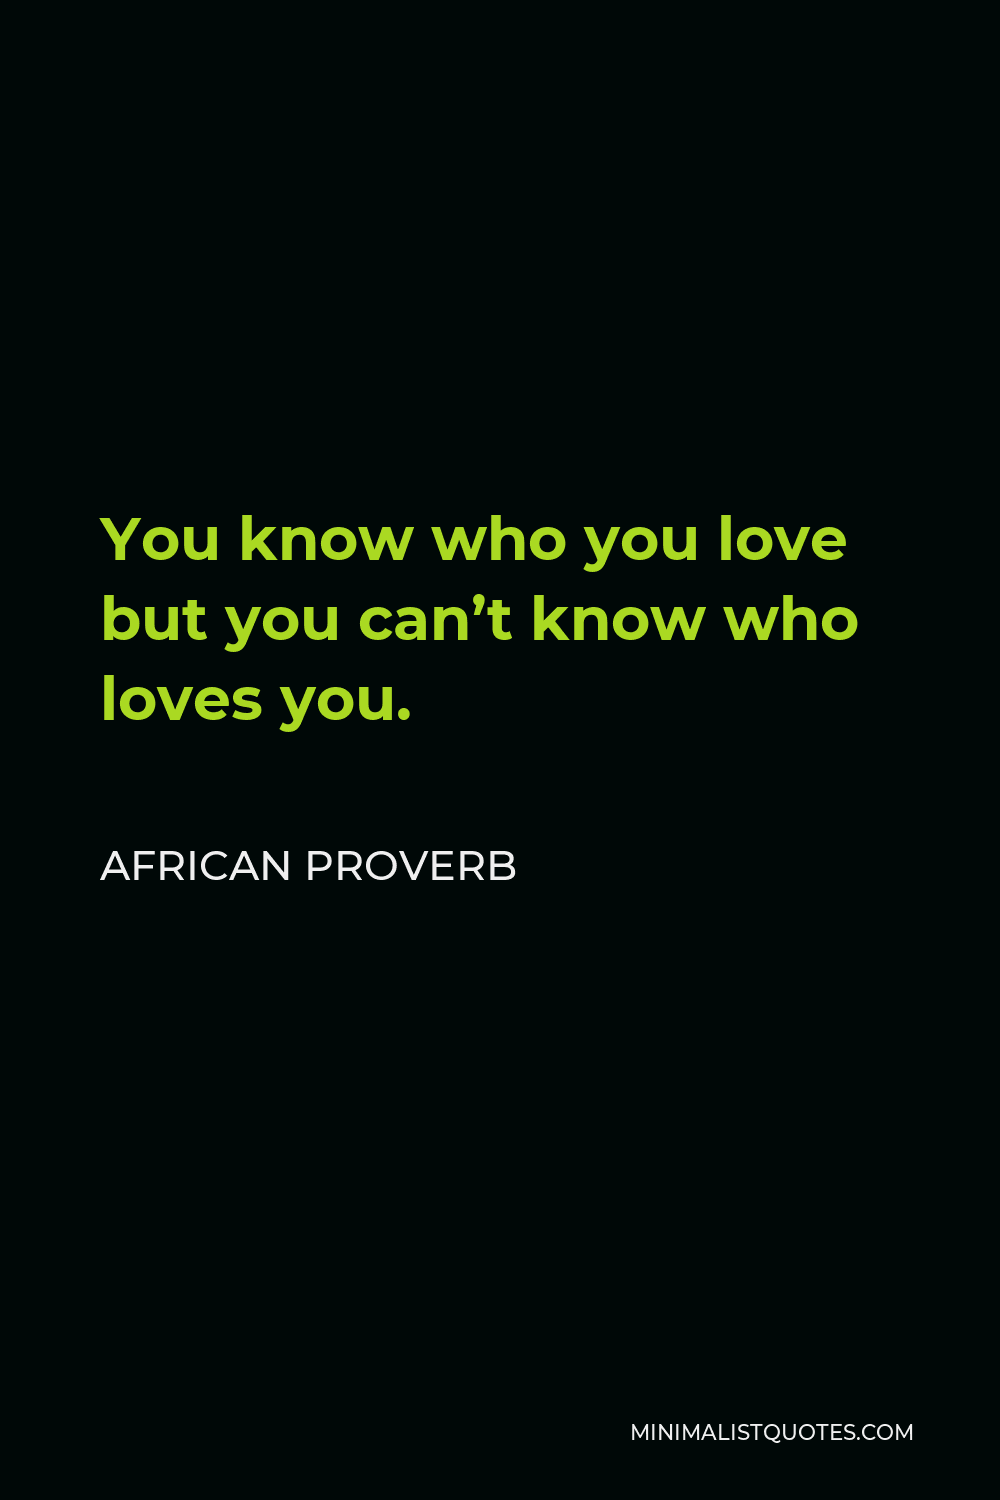 African Proverb Quote - You know who you love but you can’t know who loves you.